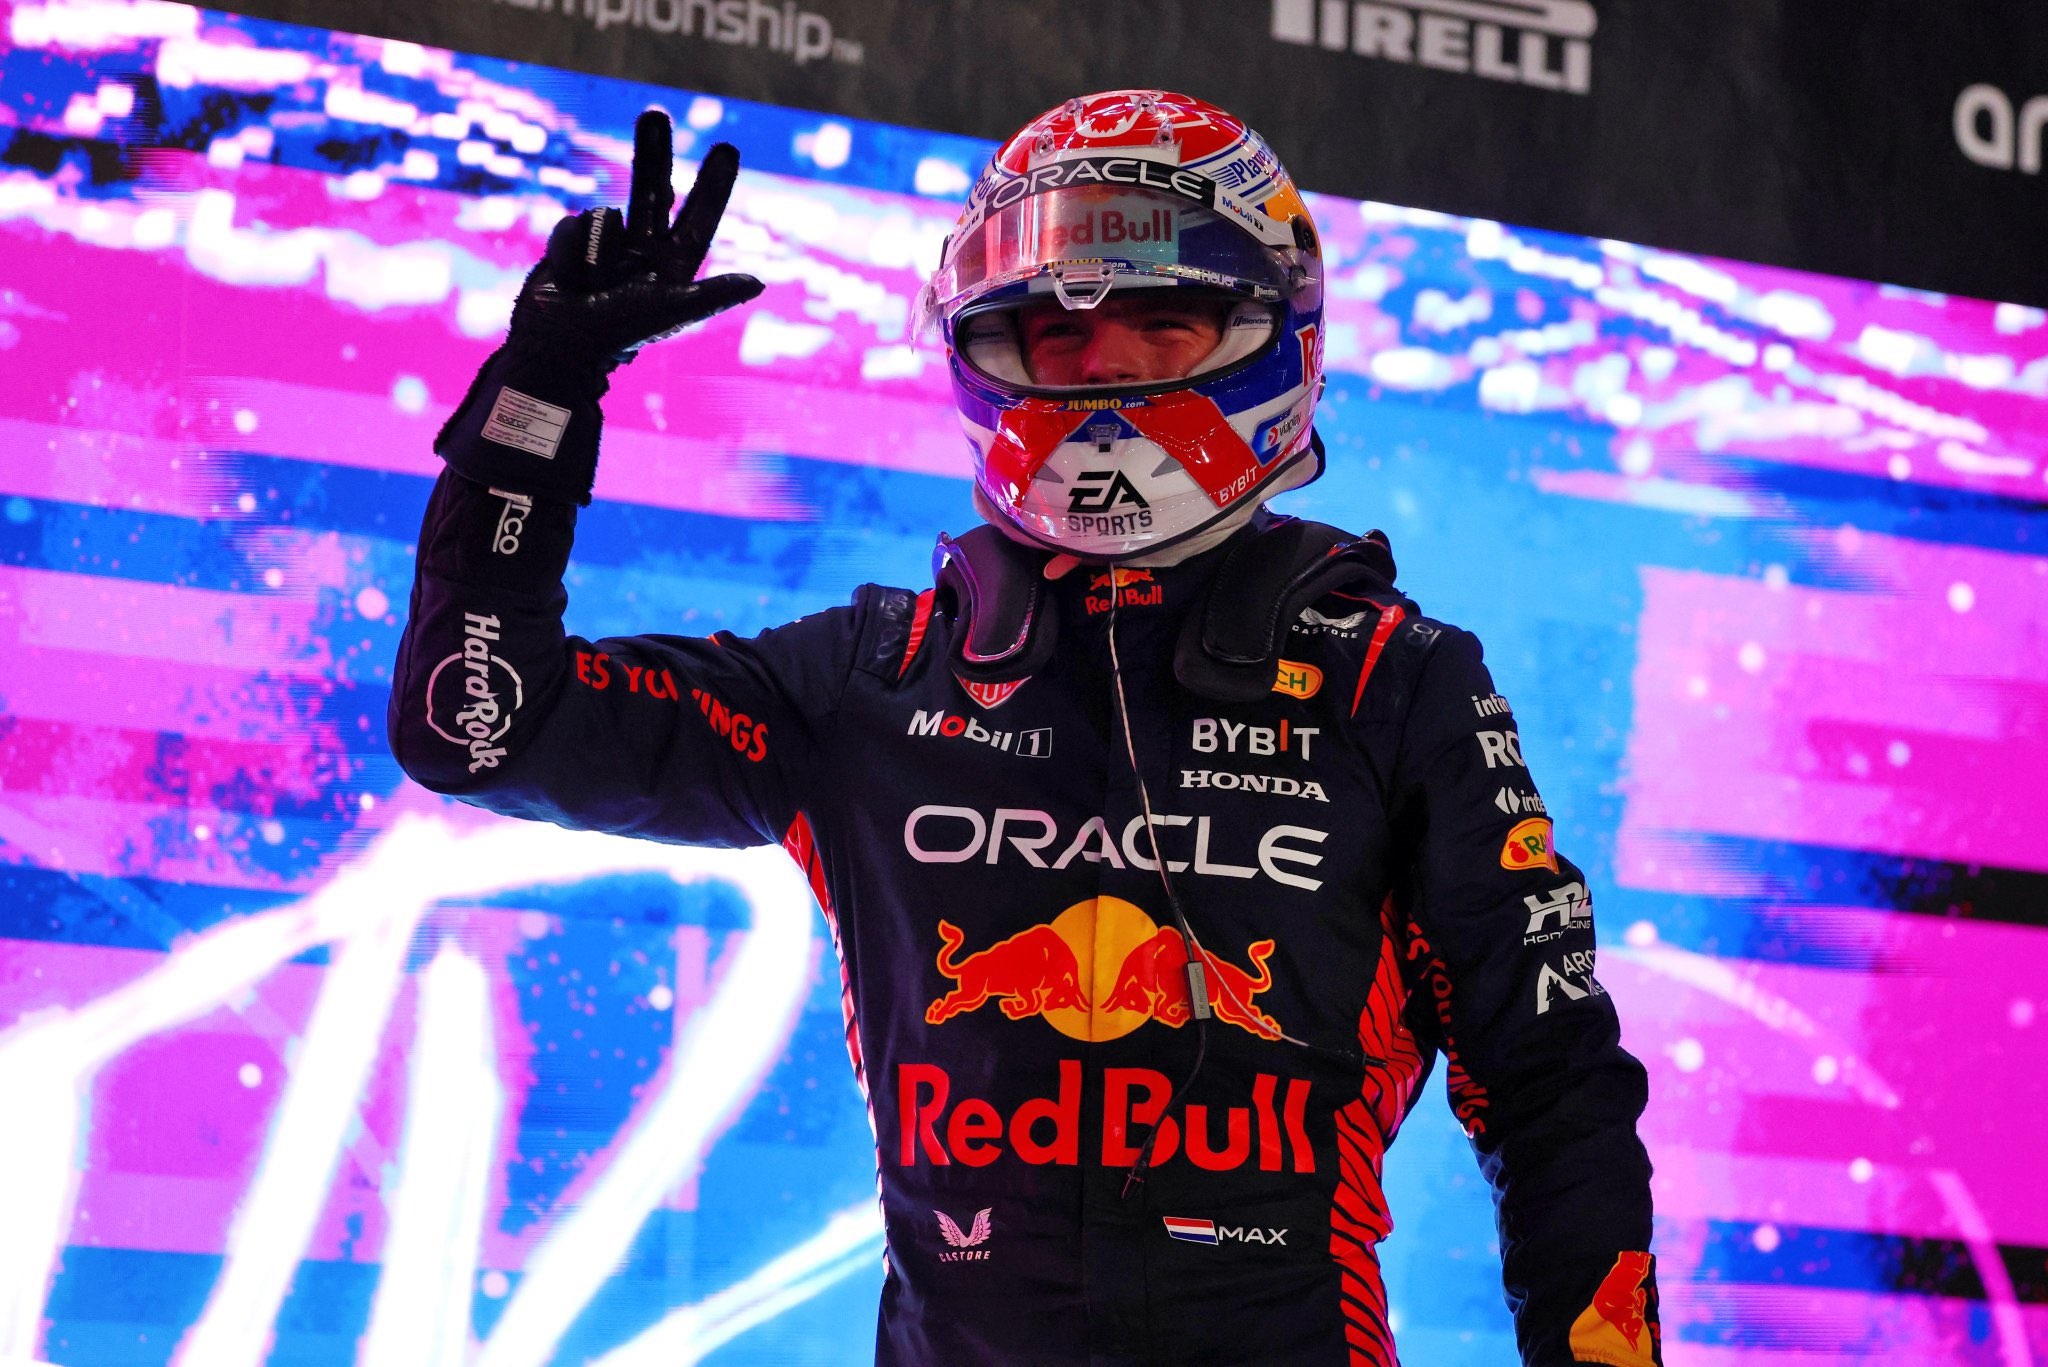 Max Verstappen Dominates Qatar Grand Prix After Hamilton and Russell Collision